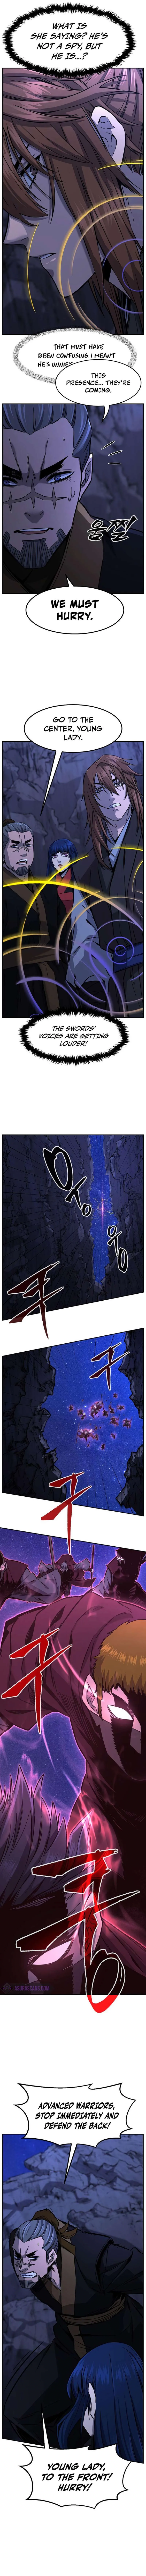 Absolute Sword Sense Chapter 45 page 11